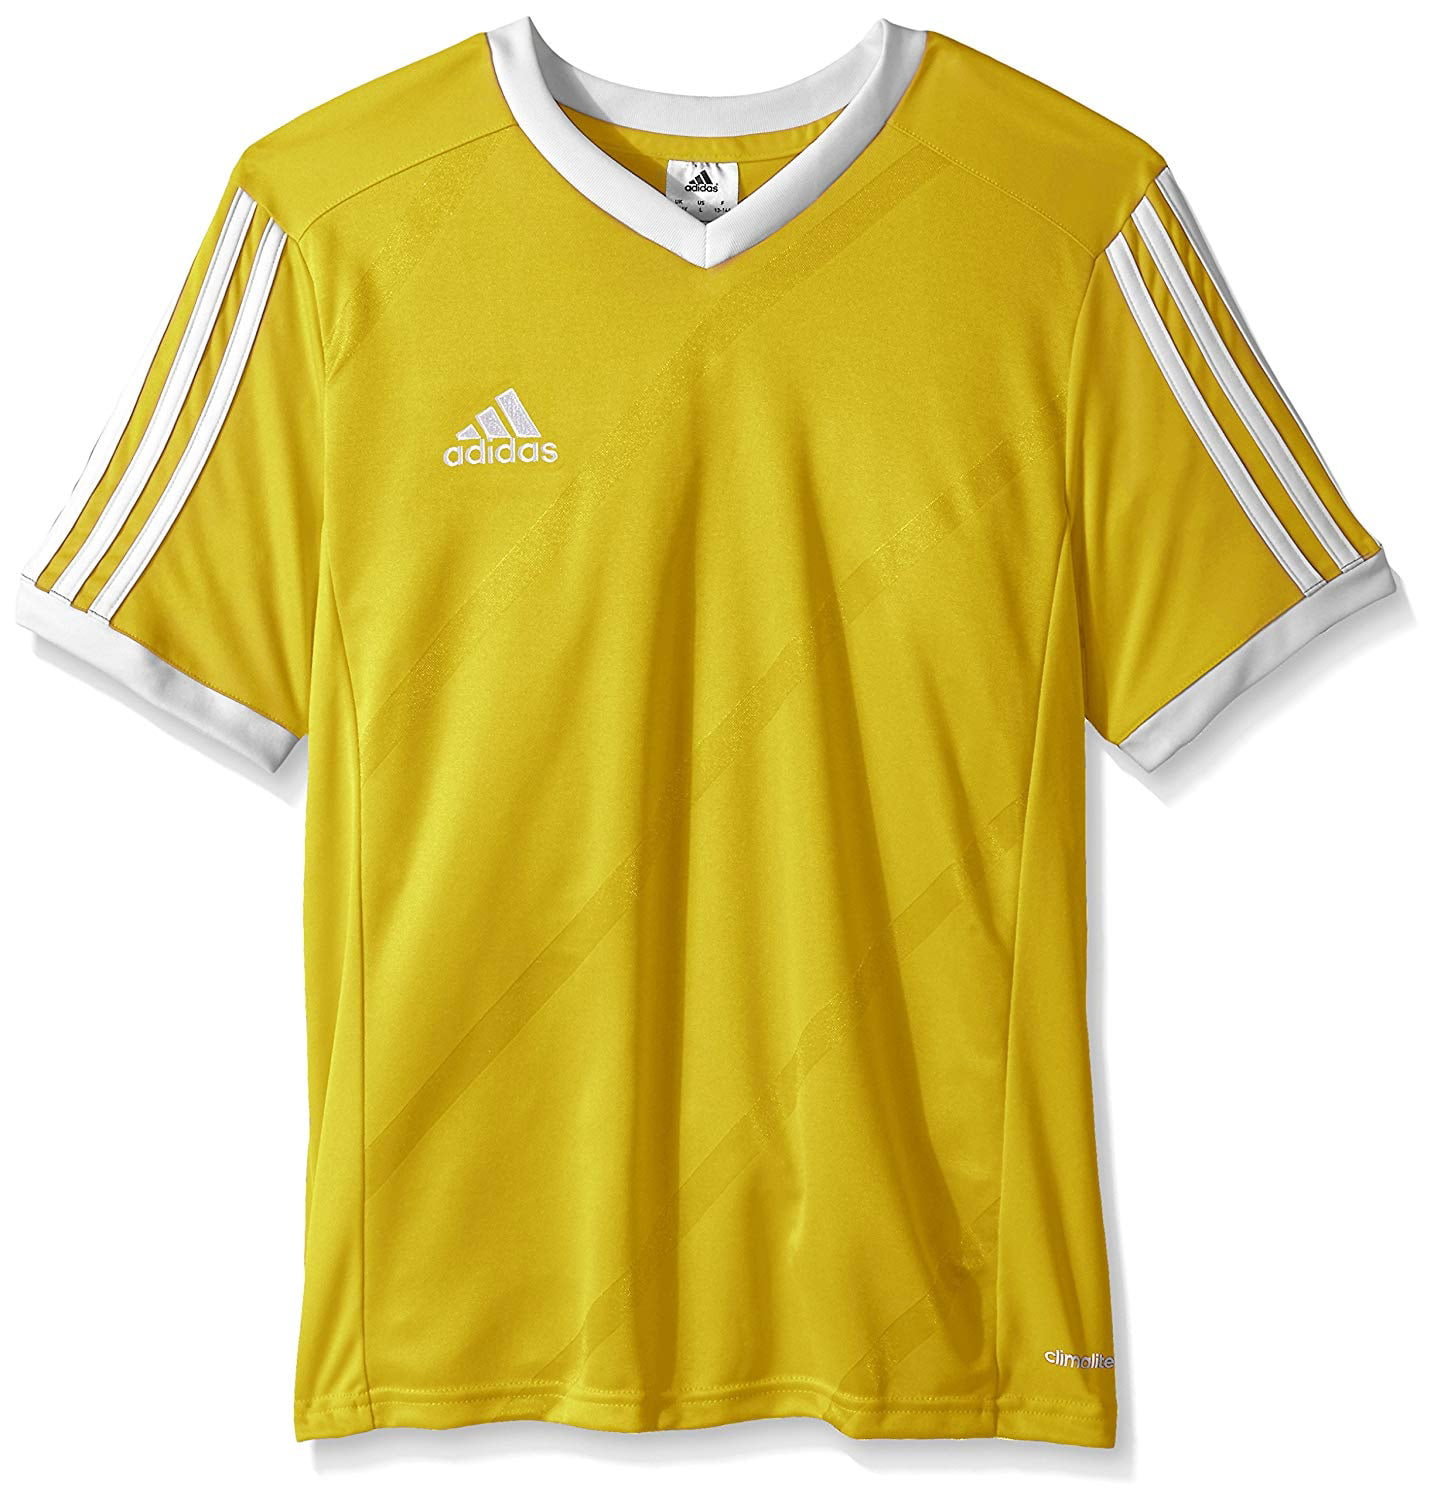 yellow and white jersey